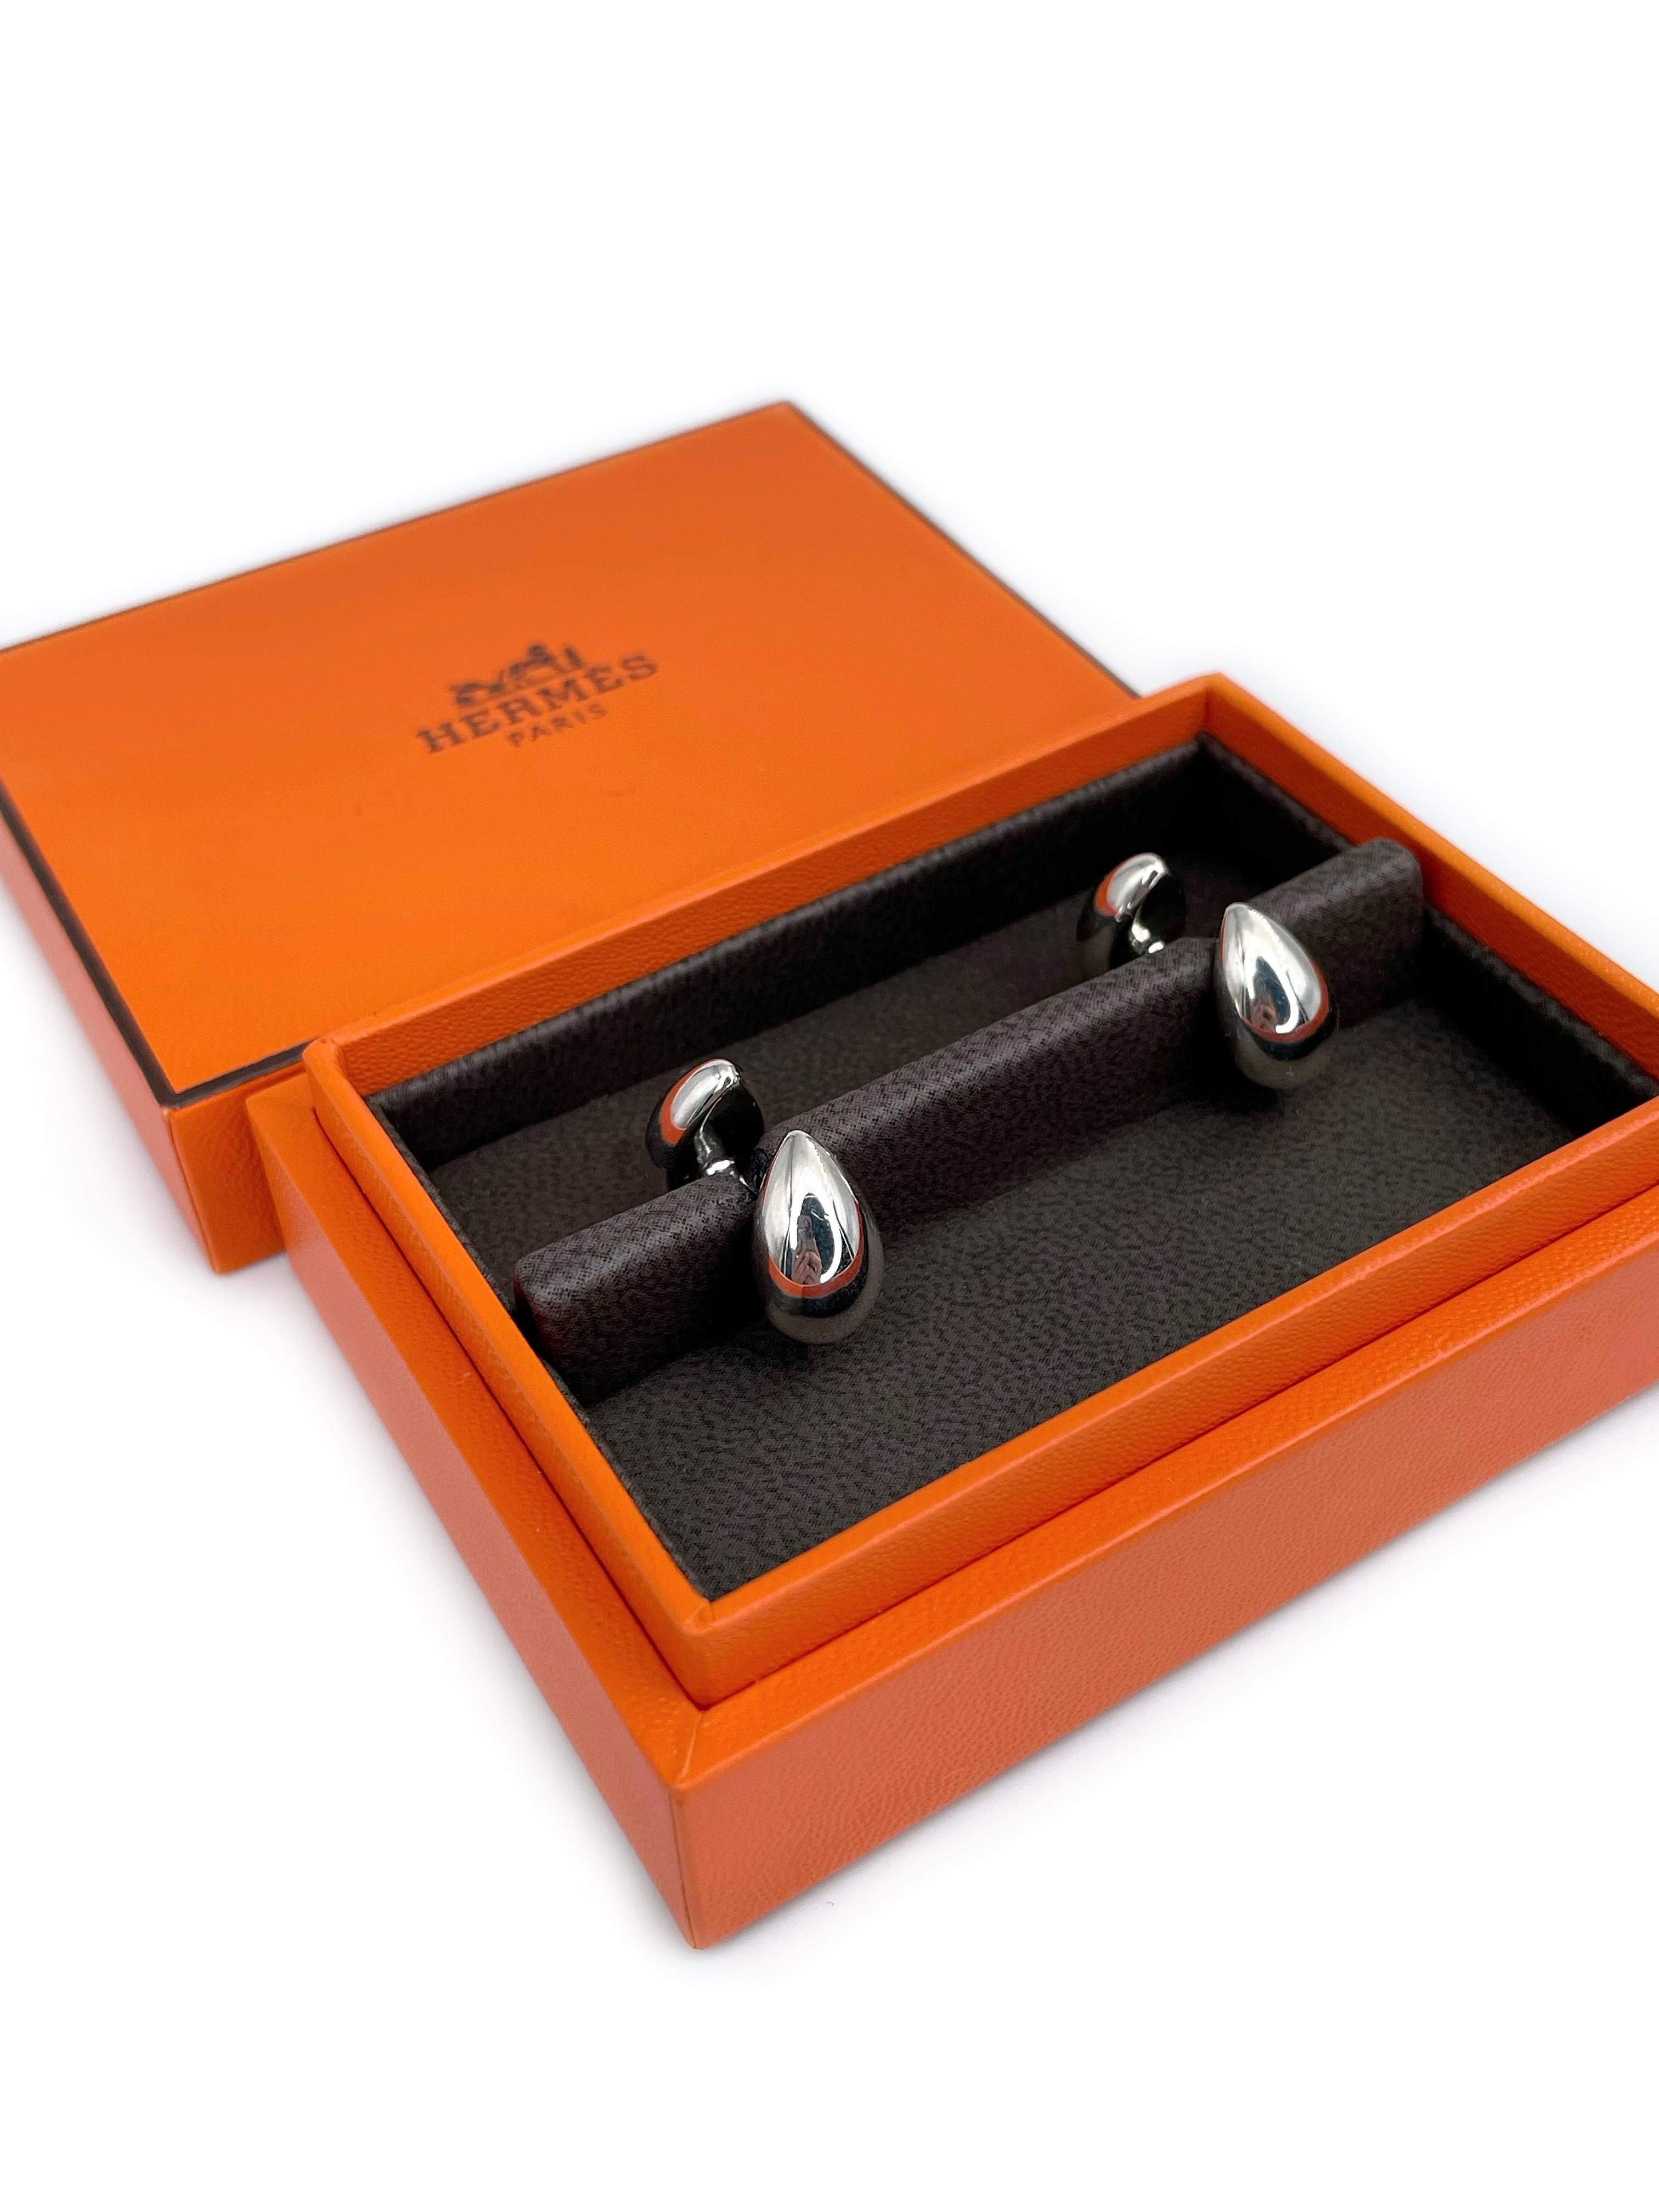 This is a classic pair of drop shape cufflinks designed by Hermès in 2000s. The piece is crafted in 925 hallmark silver. 

Signed: “ Hermes. 925”

Cufflink length: 2cm
Weight: 14.23g

———

If you have any questions, please feel free to ask. We